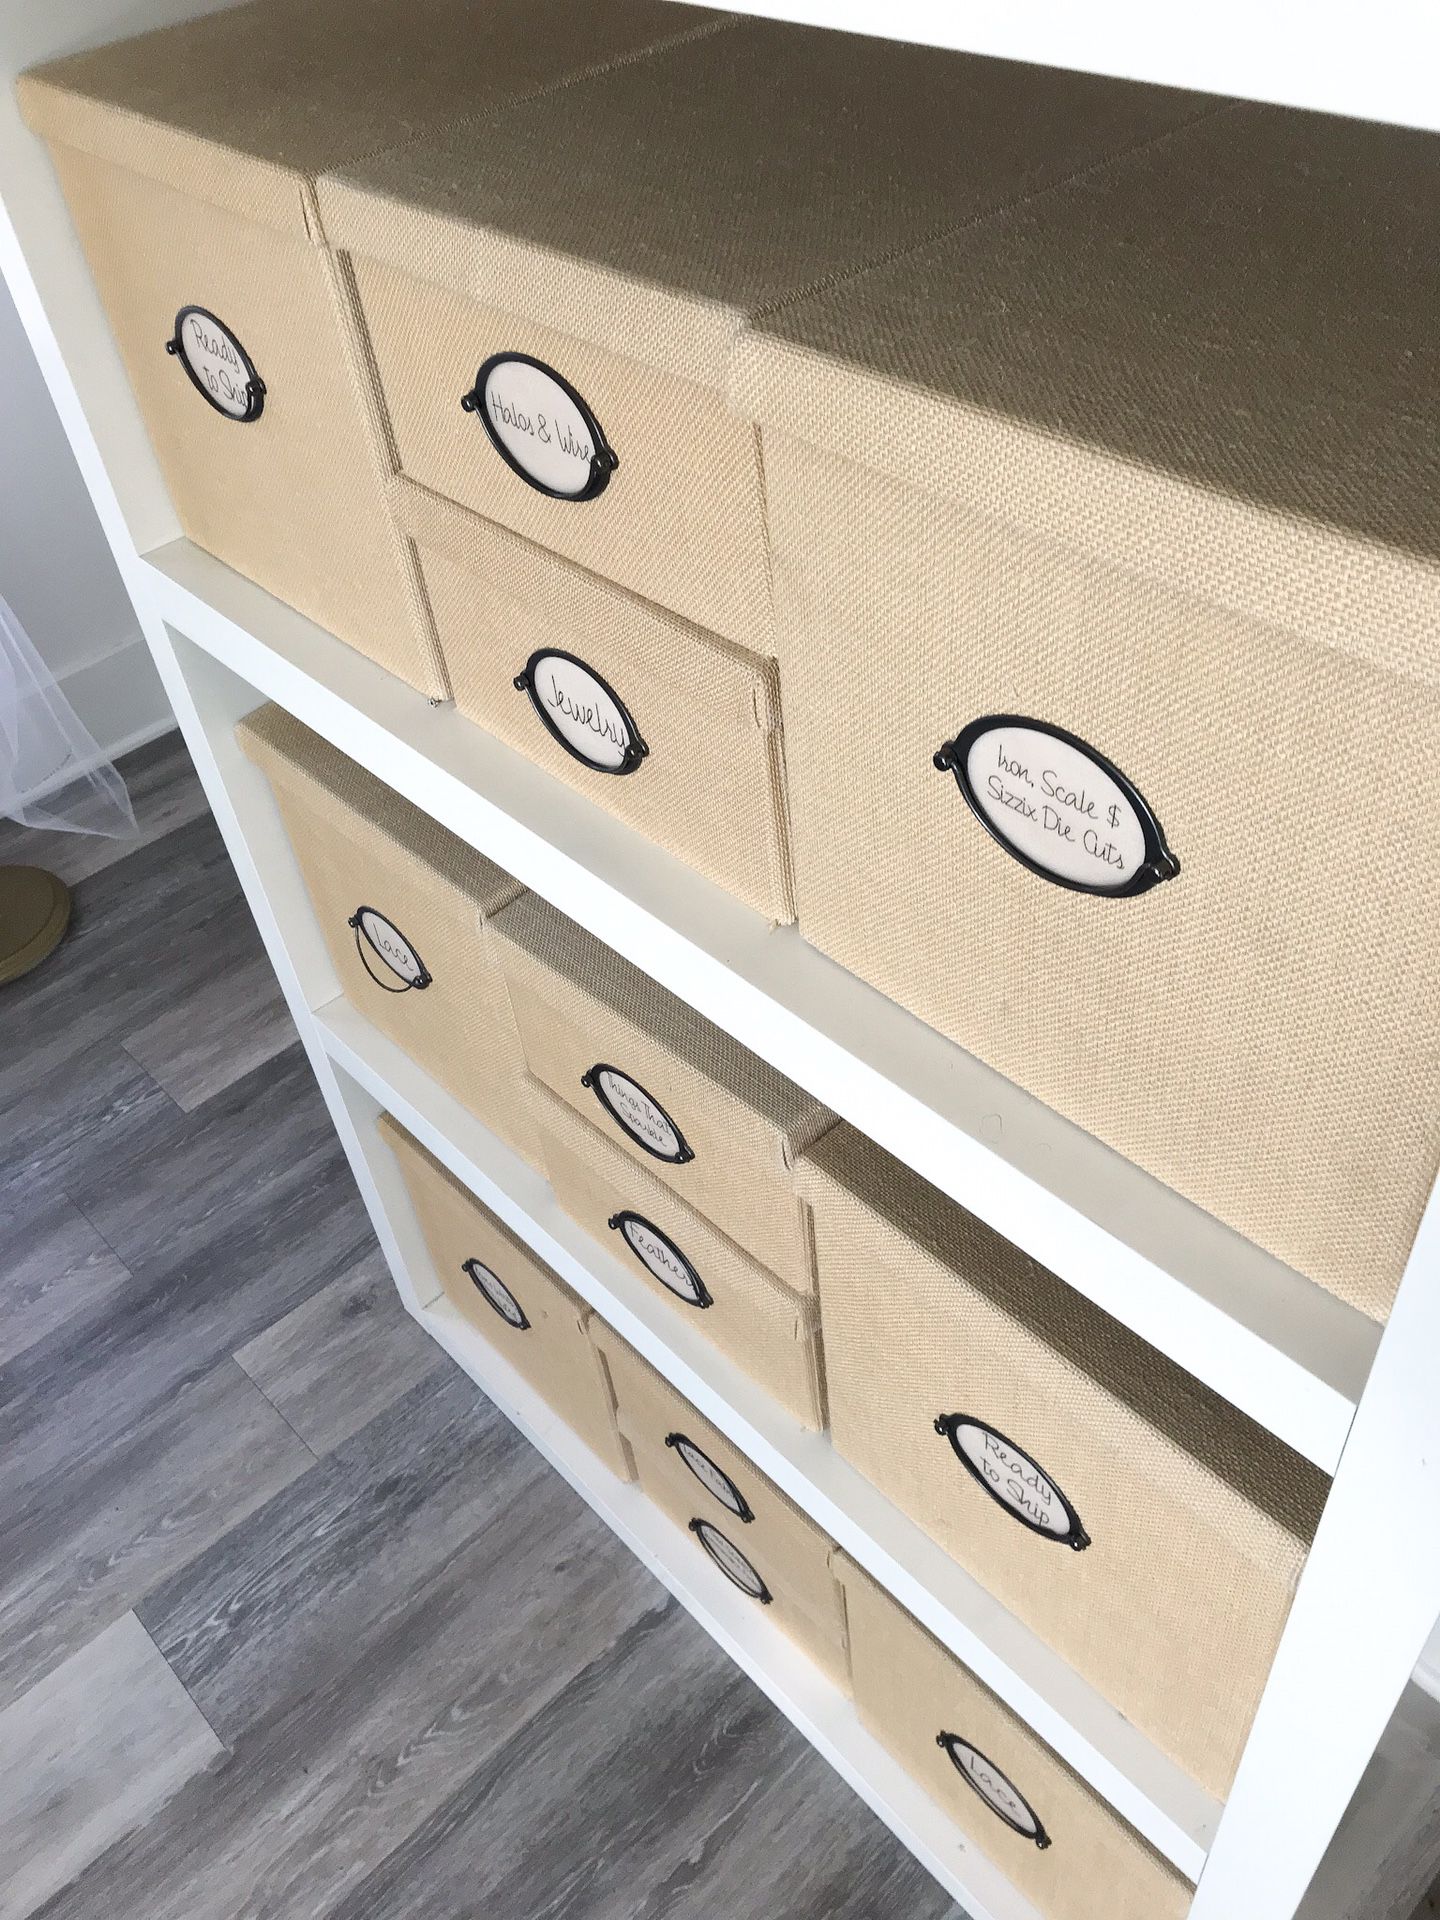 Extra Large Storage Bins, Storage Boxes with Lids Pretty, Storage Bins for  Clothes, Beige, 3-Pack for Sale in Brooklyn, NY - OfferUp